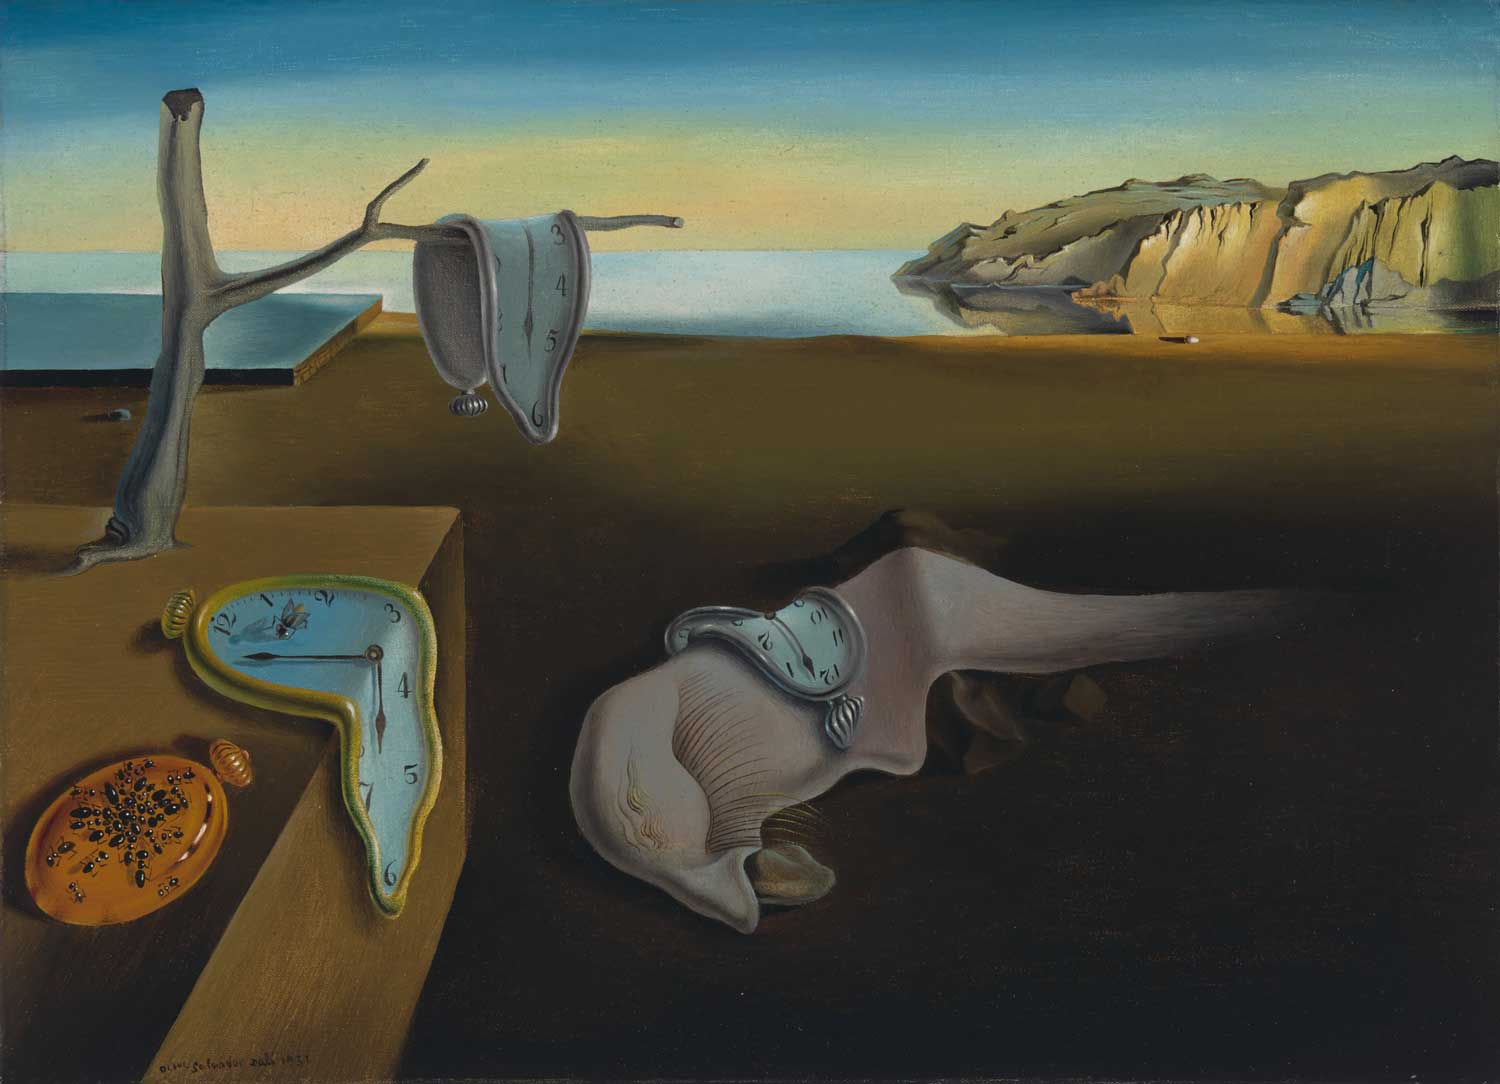 The Persistence of Memory by Salvador Dali, 1931 (image MoMA)